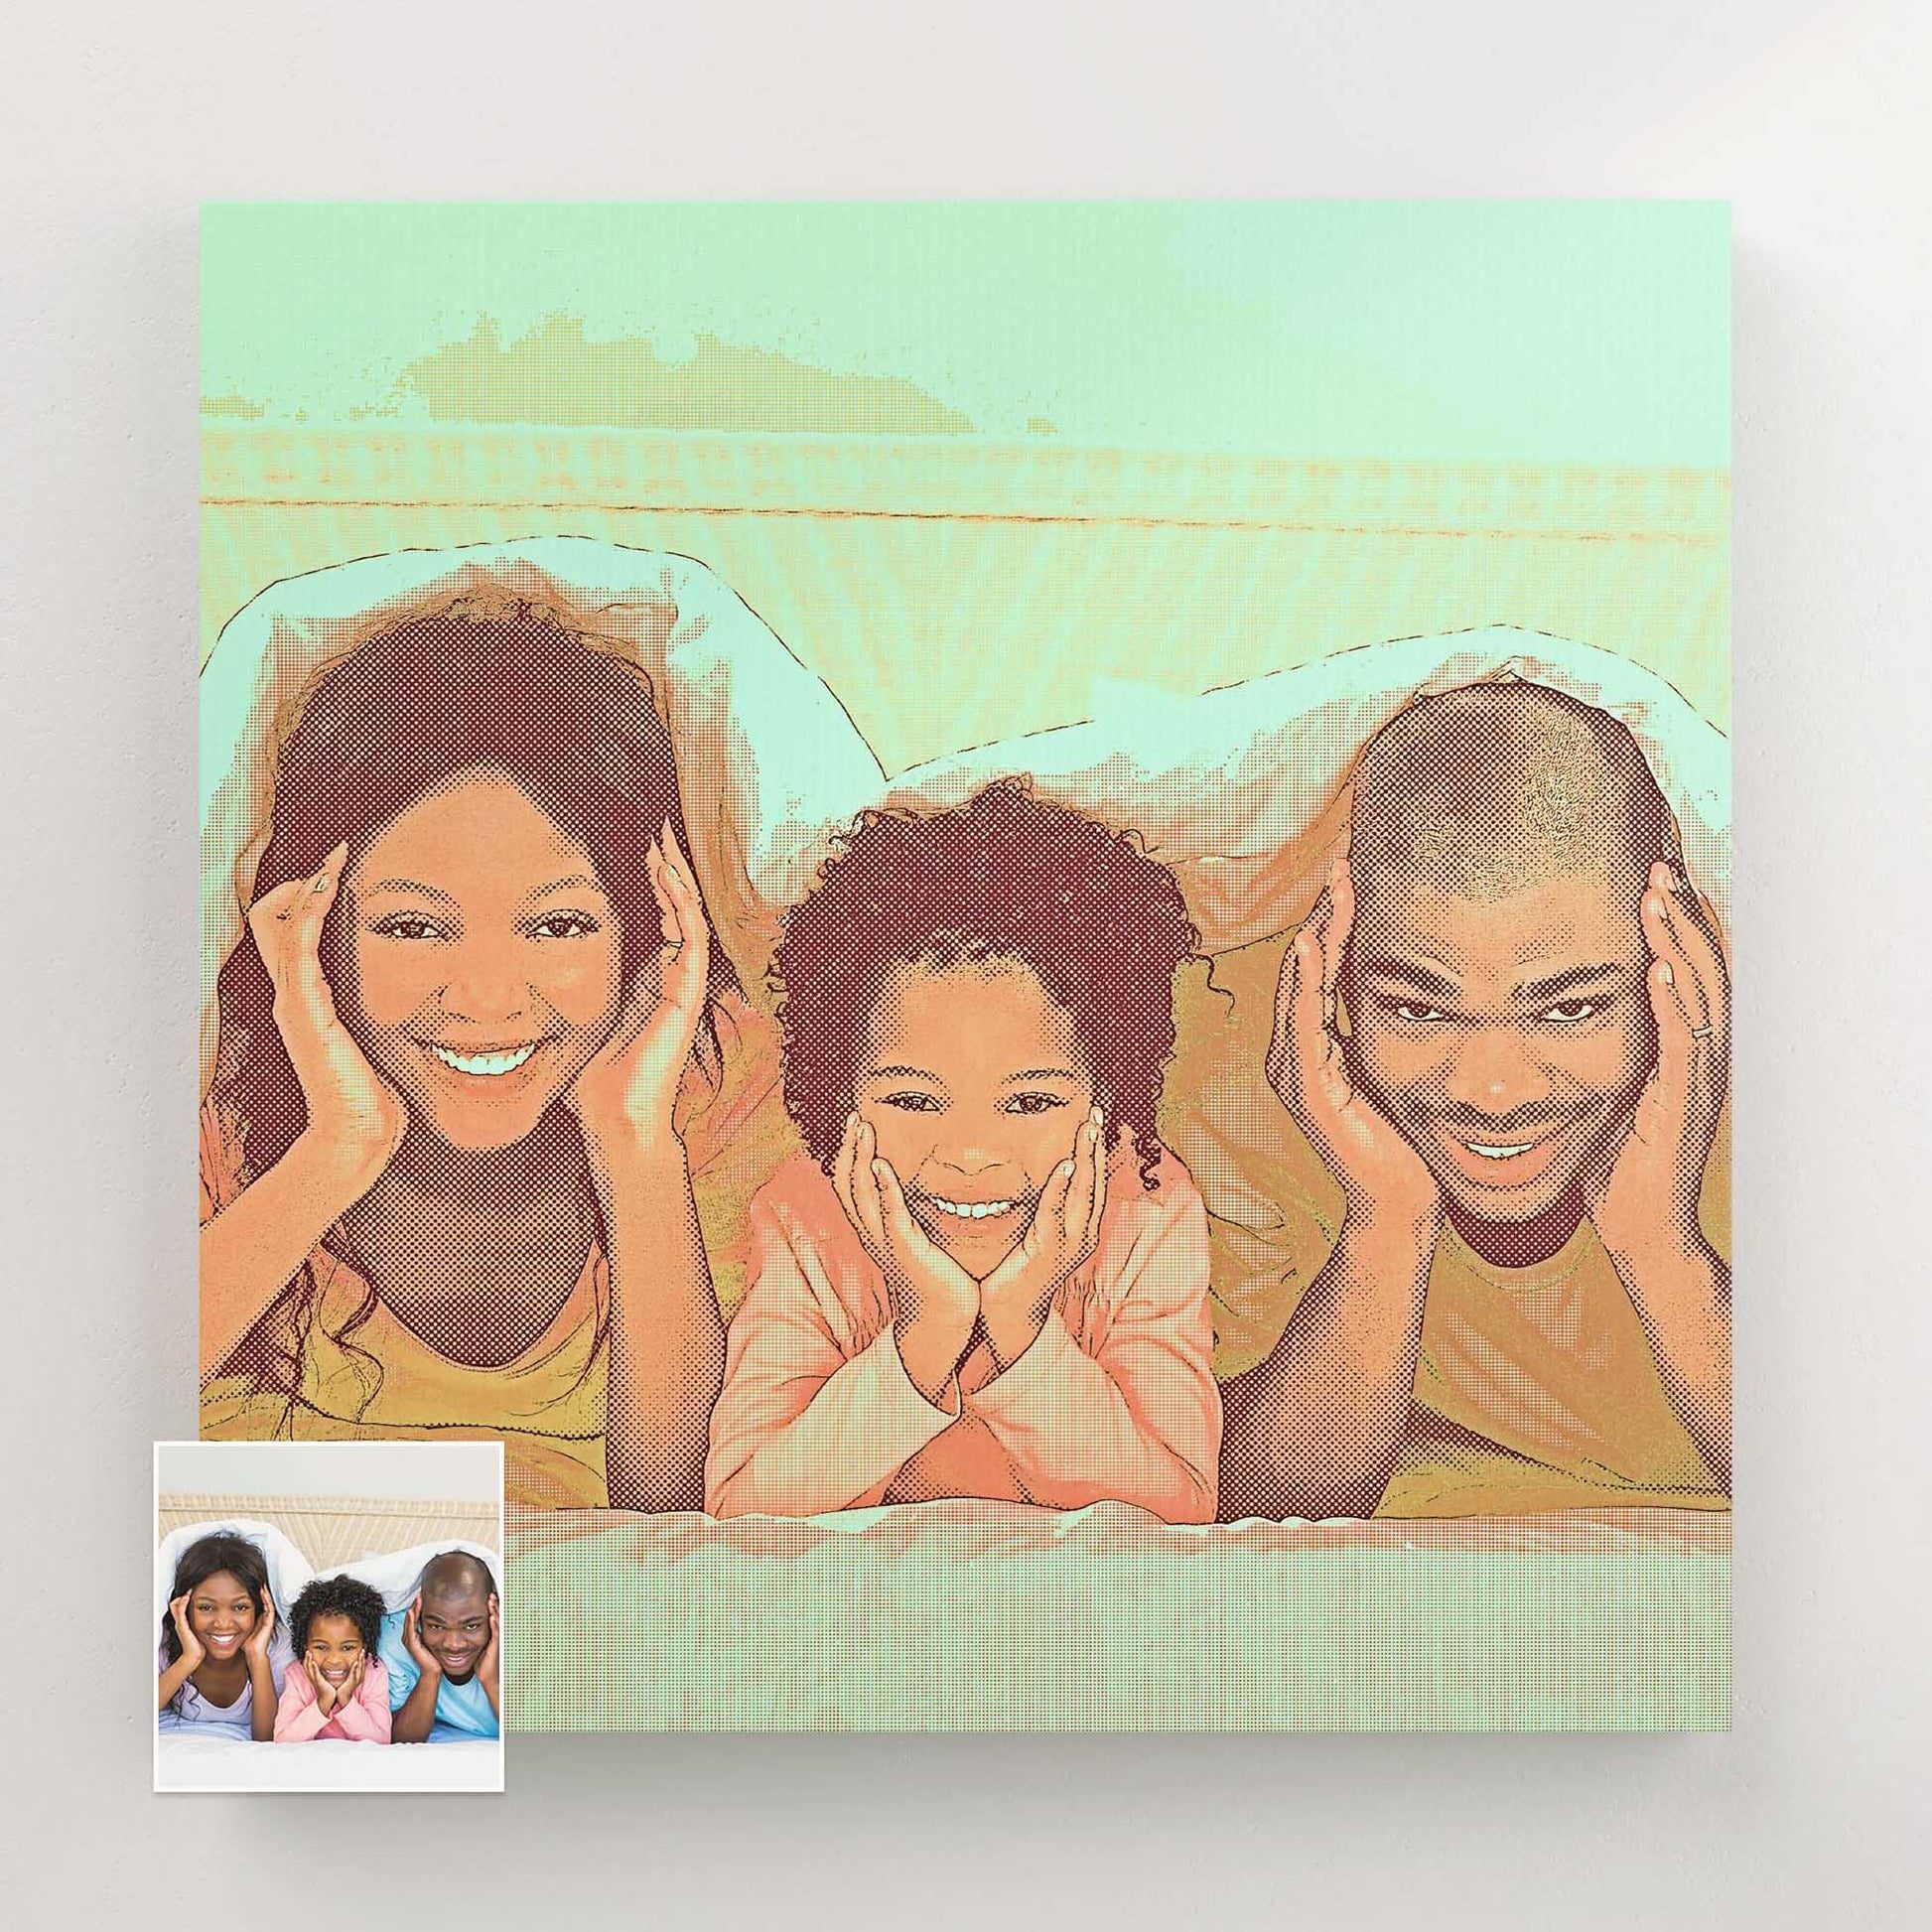 Immerse yourself in the energy and creativity of the Personalised Orange and Green Canvas. With its unique drawing based on your photo, this exceptional artwork is printed on a meticulously woven canvas by skilled artisans